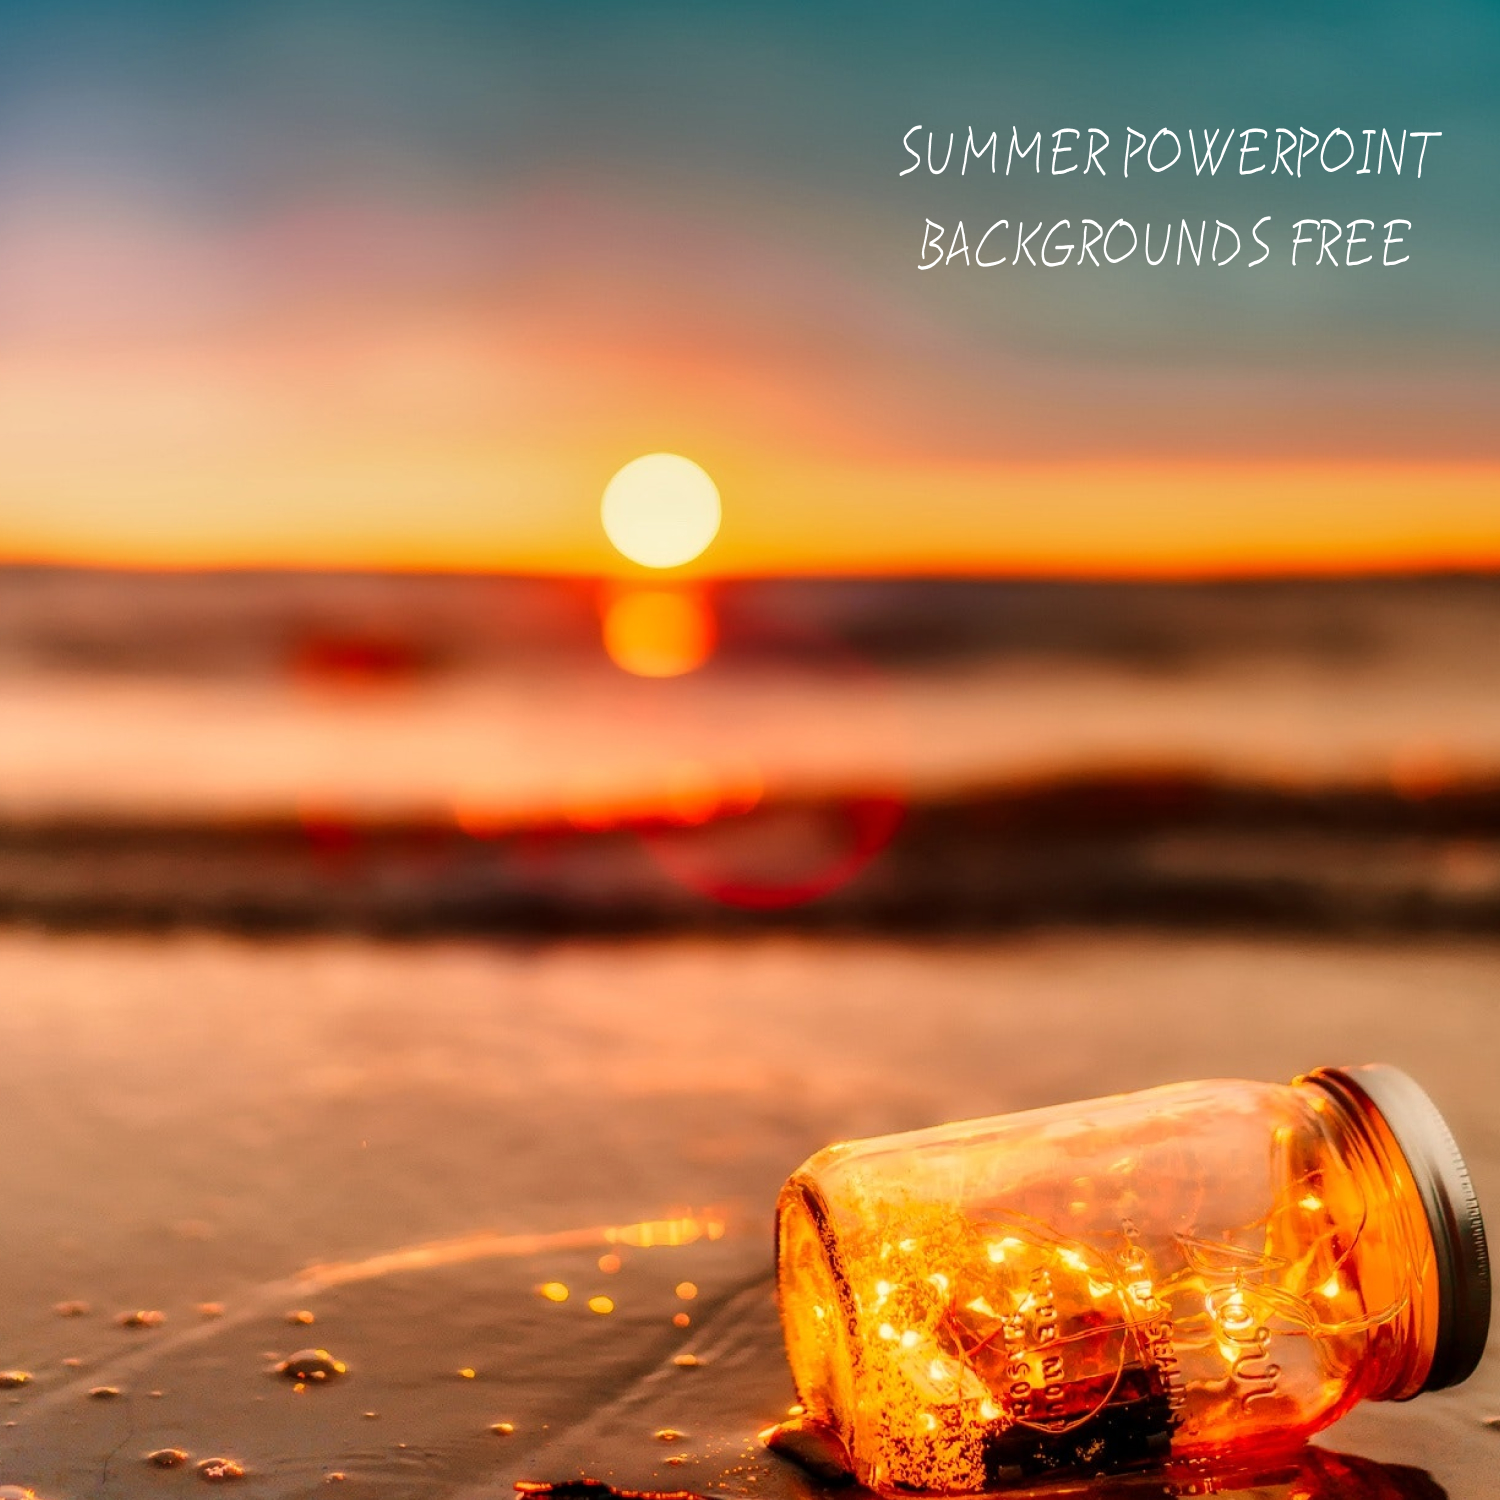 Prints of summer powerpoint backgrounds.